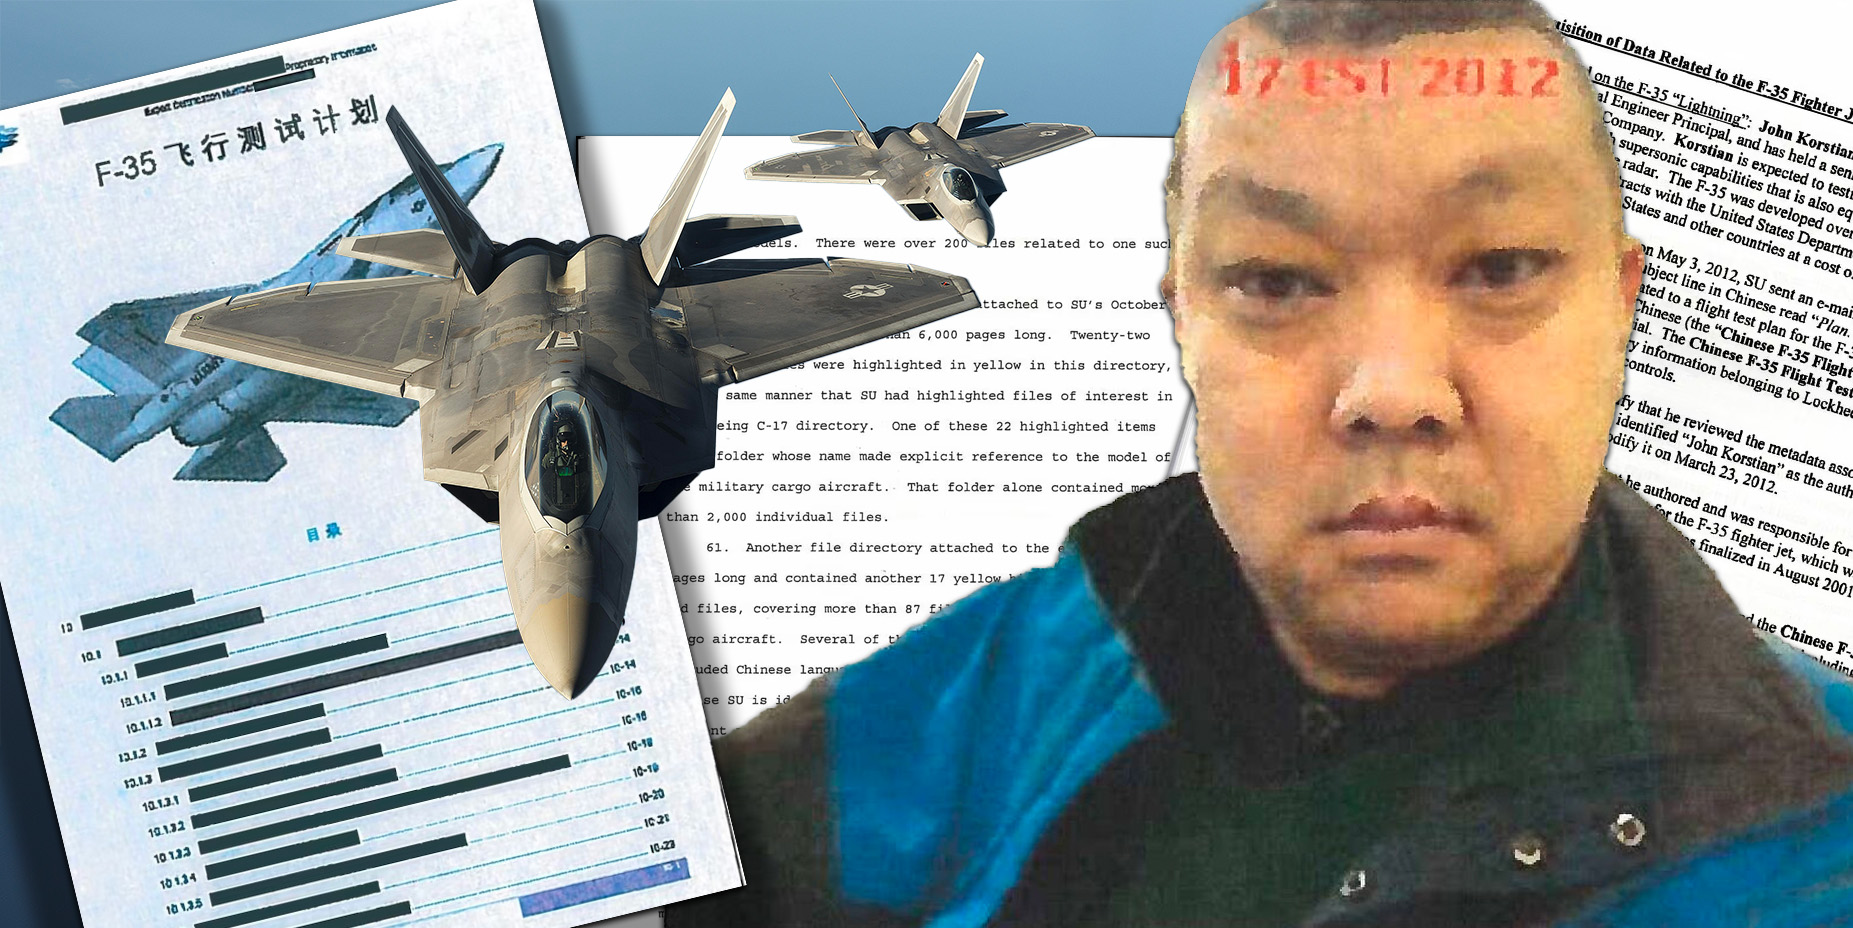 The man who stole America's stealth fighter secrets for China